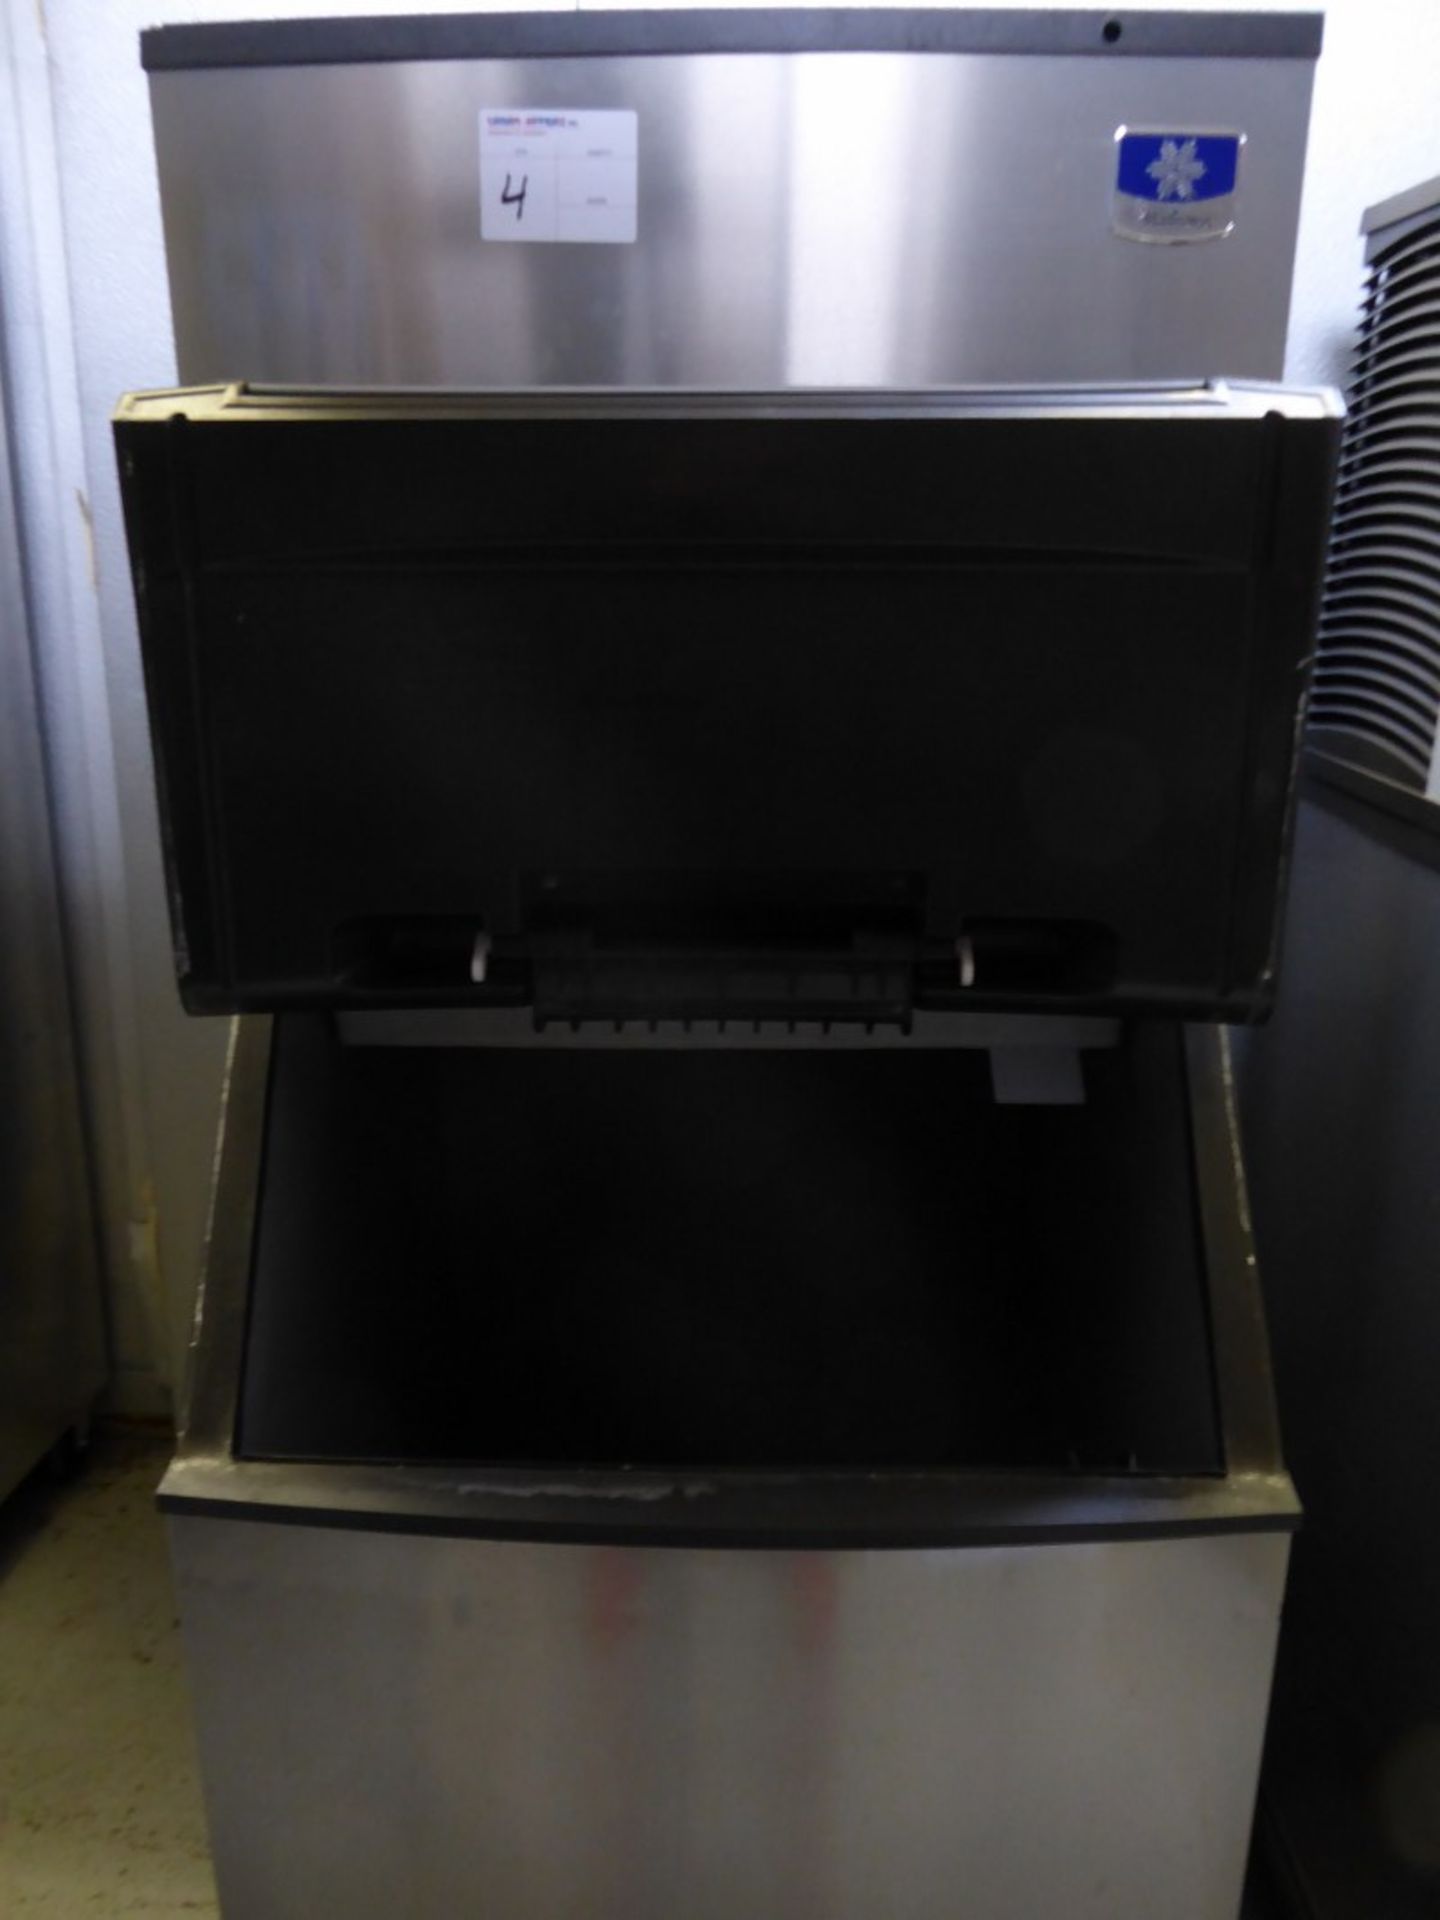 MANITOWOC - STAINLESS STEEL - ICE MACHINE - MODEL # IY0504A-161 - Image 2 of 4